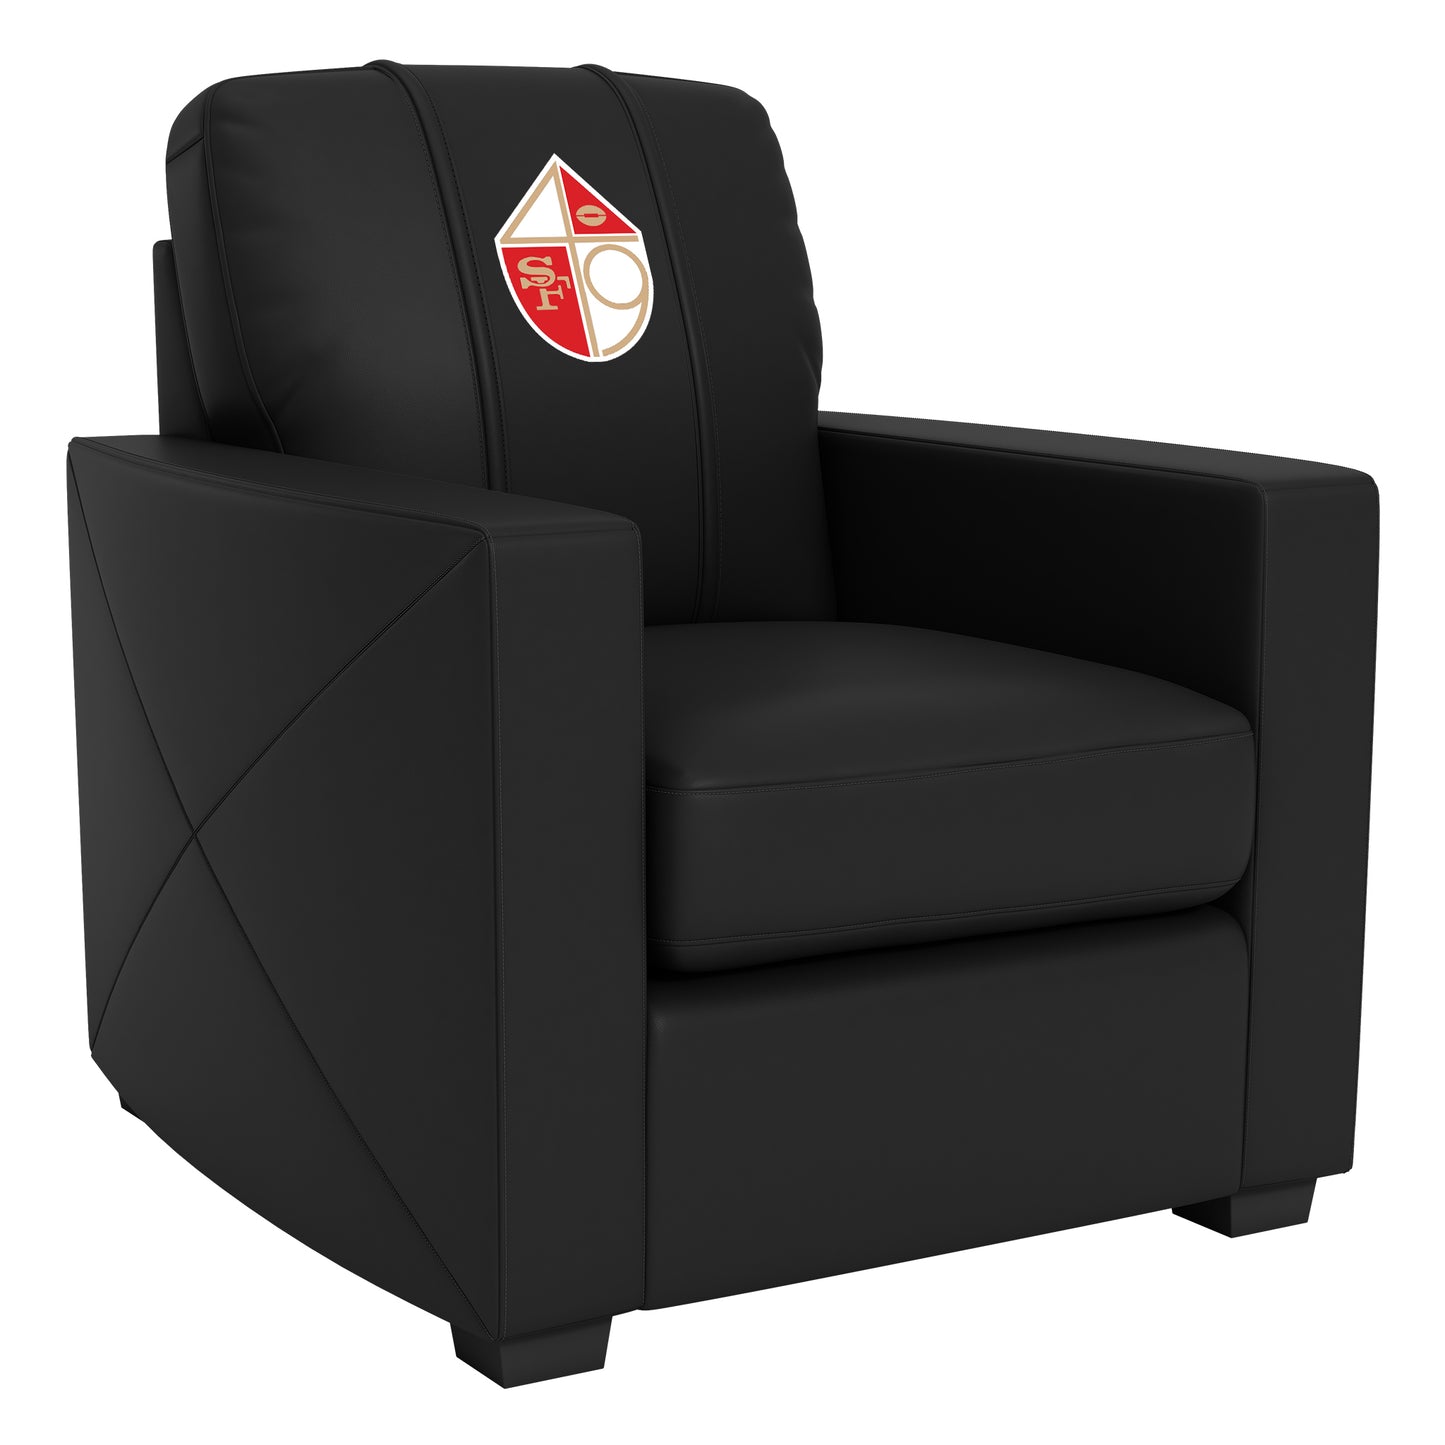 Silver Club Chair with San Francisco 49ers Classic Logo